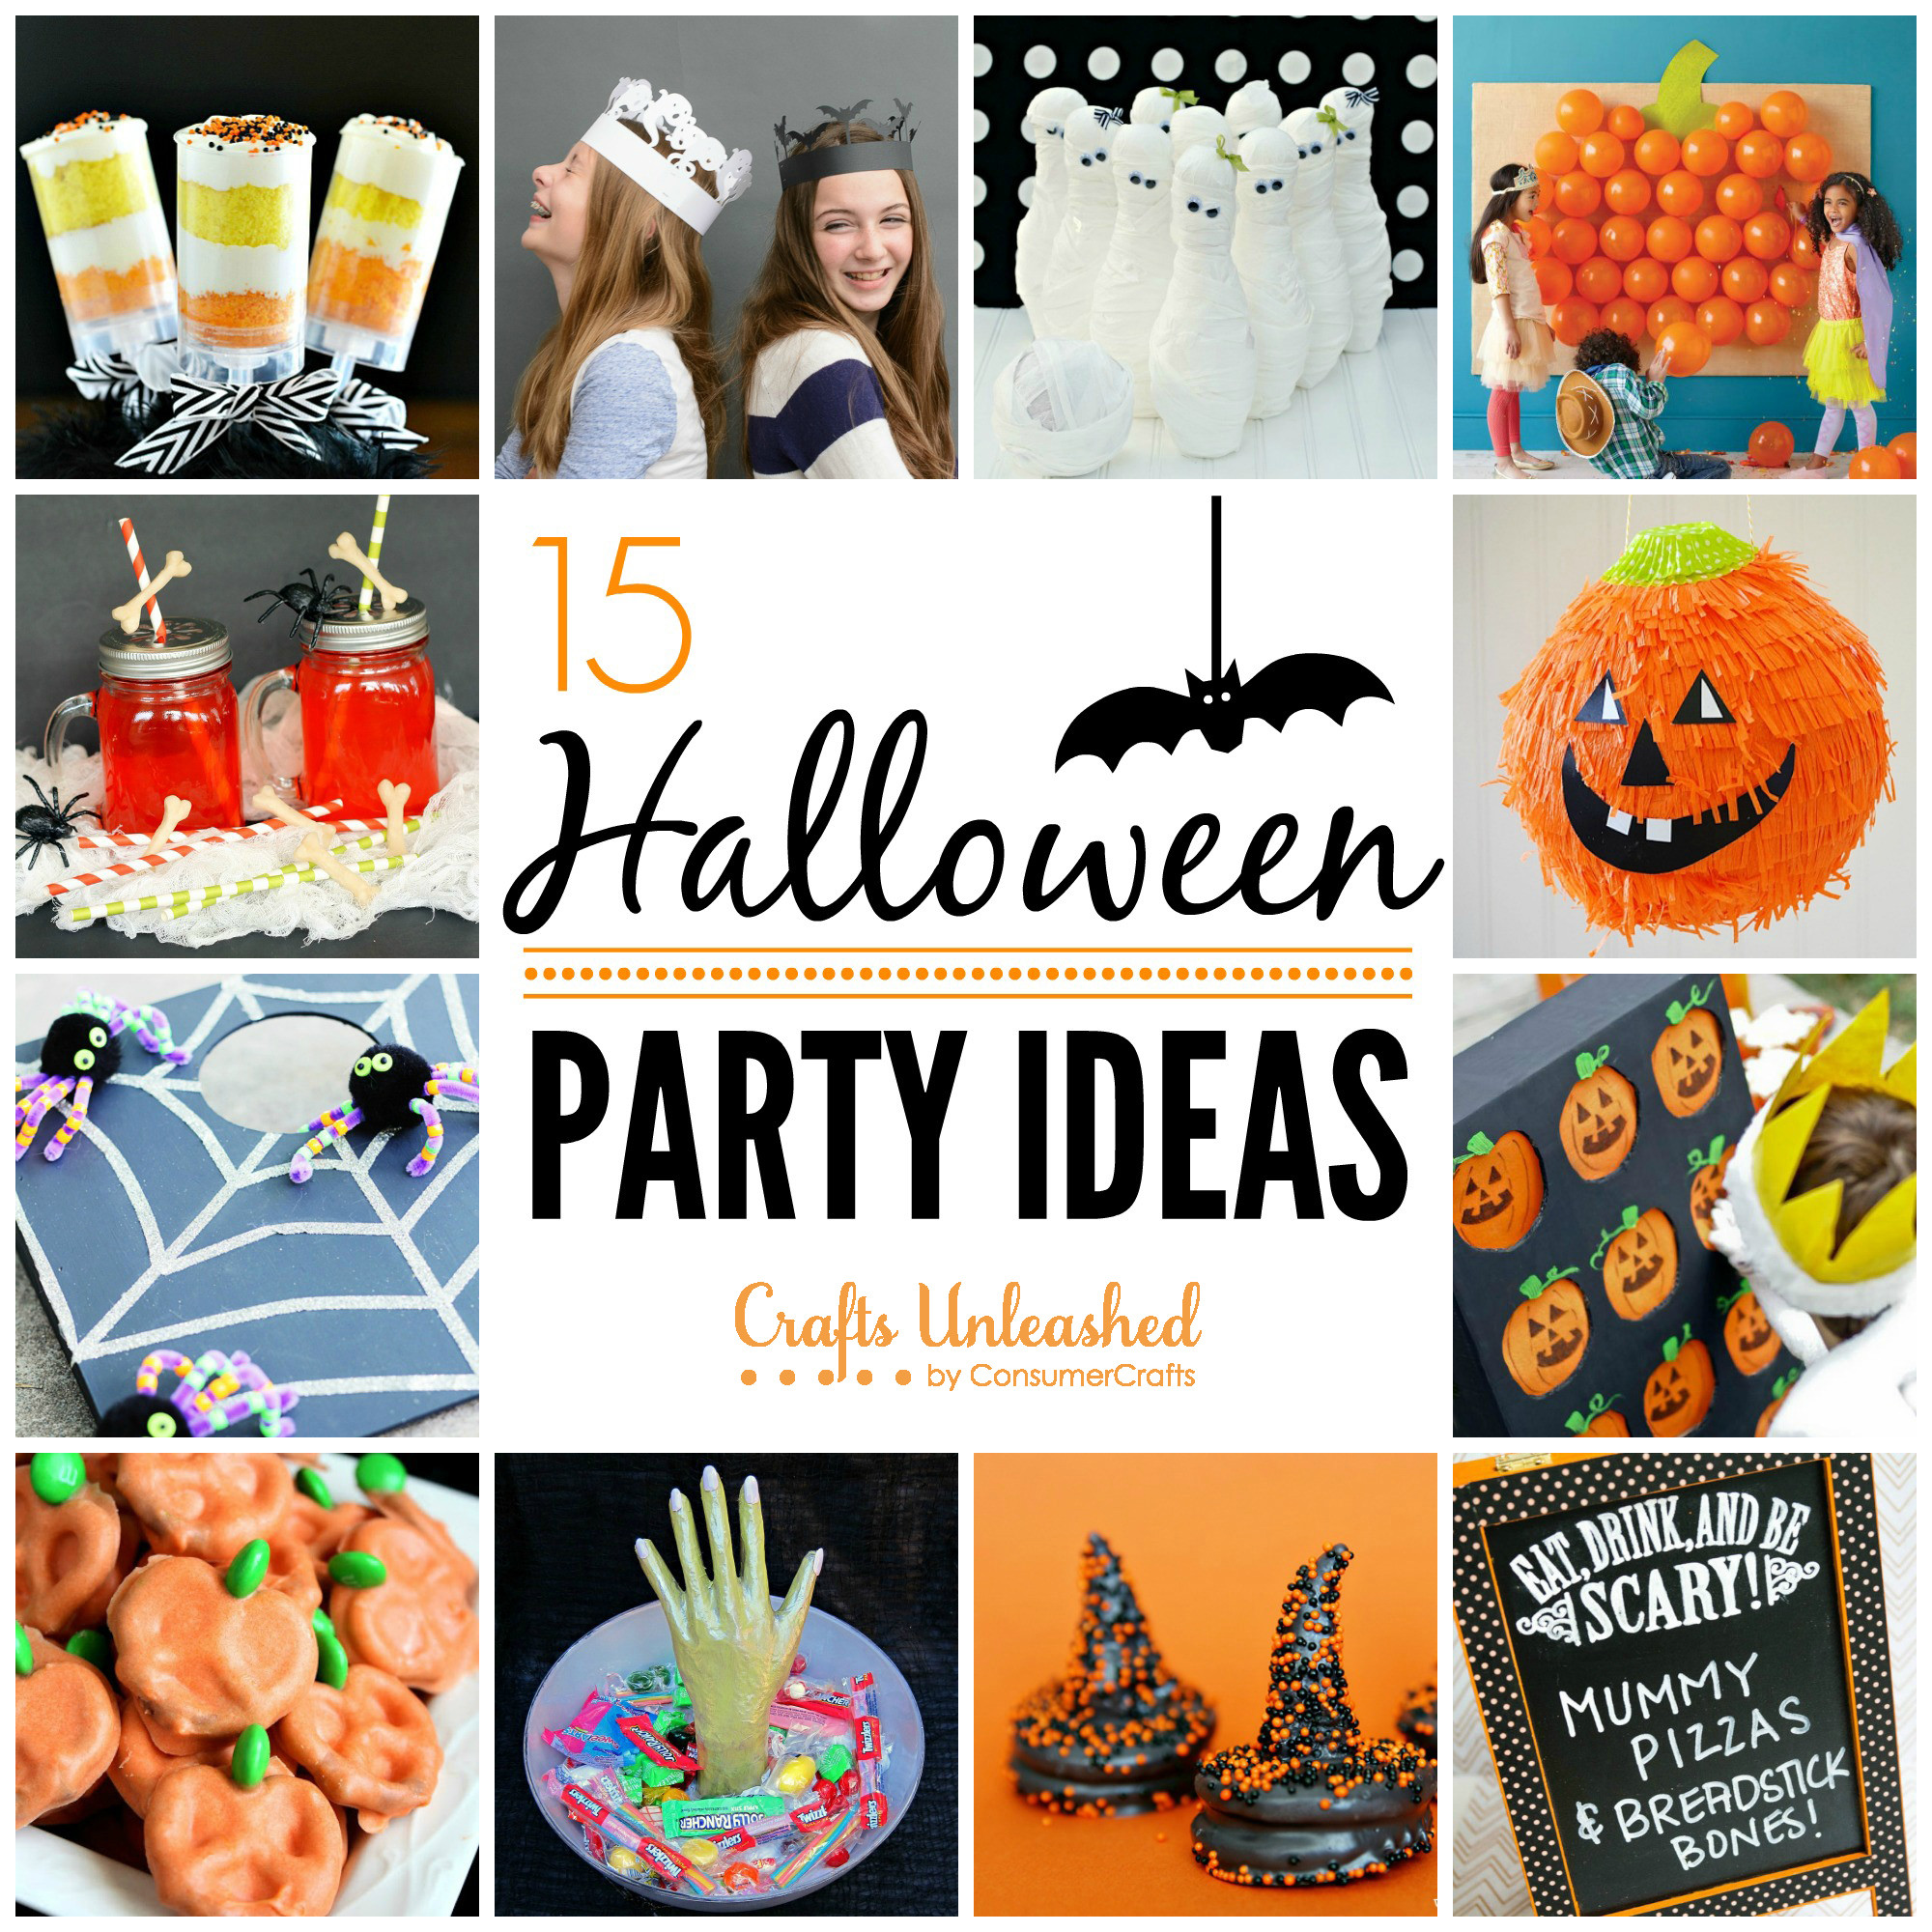 Halloween Party Craft Ideas
 Halloween Party Ideas Crafts Unleashed